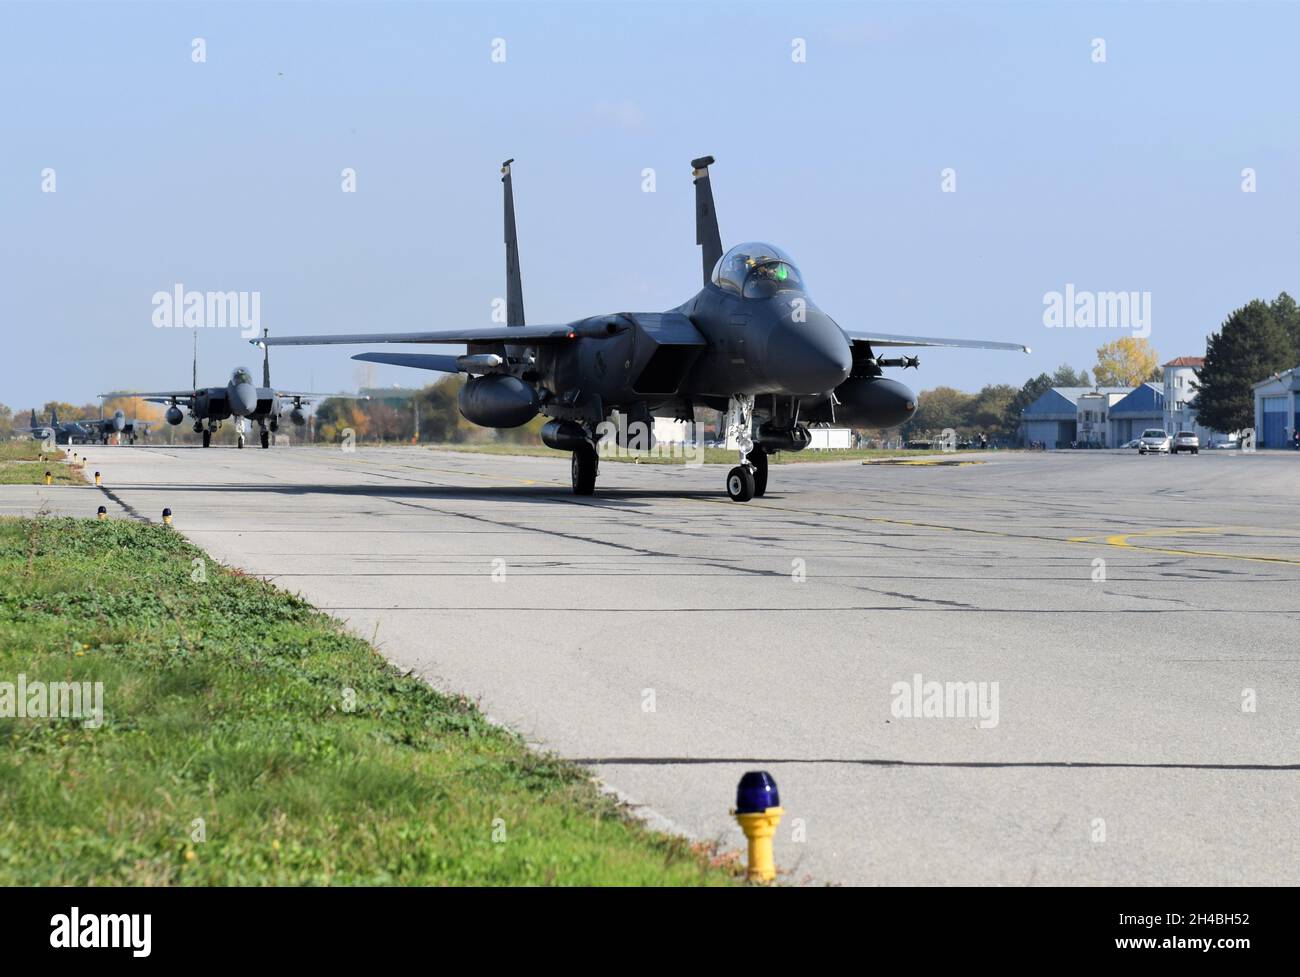 U.S. F-15E Strike Eagle aircraft from the 336th Fighter Squadron, 4th Fighter Wing, Seymour Johnson Air Force Base, North Carolina, arrive at Graf Ignatievo Air Base, Bulgaria, Nov. 1, 2021, in support of operation Castle Forge, a U.S. Air Forces Europe-Air Forces Africa-led joint, multinational training event. The Strike Eagles will spend the next several days training at the Bulgarian Air Force facility, continuing Castle Forge’s objective of affirming U.S. commitment to NATO allies in the Black Sea region (U.S. Air Force photo by Capt. Andrew Layton). Stock Photo